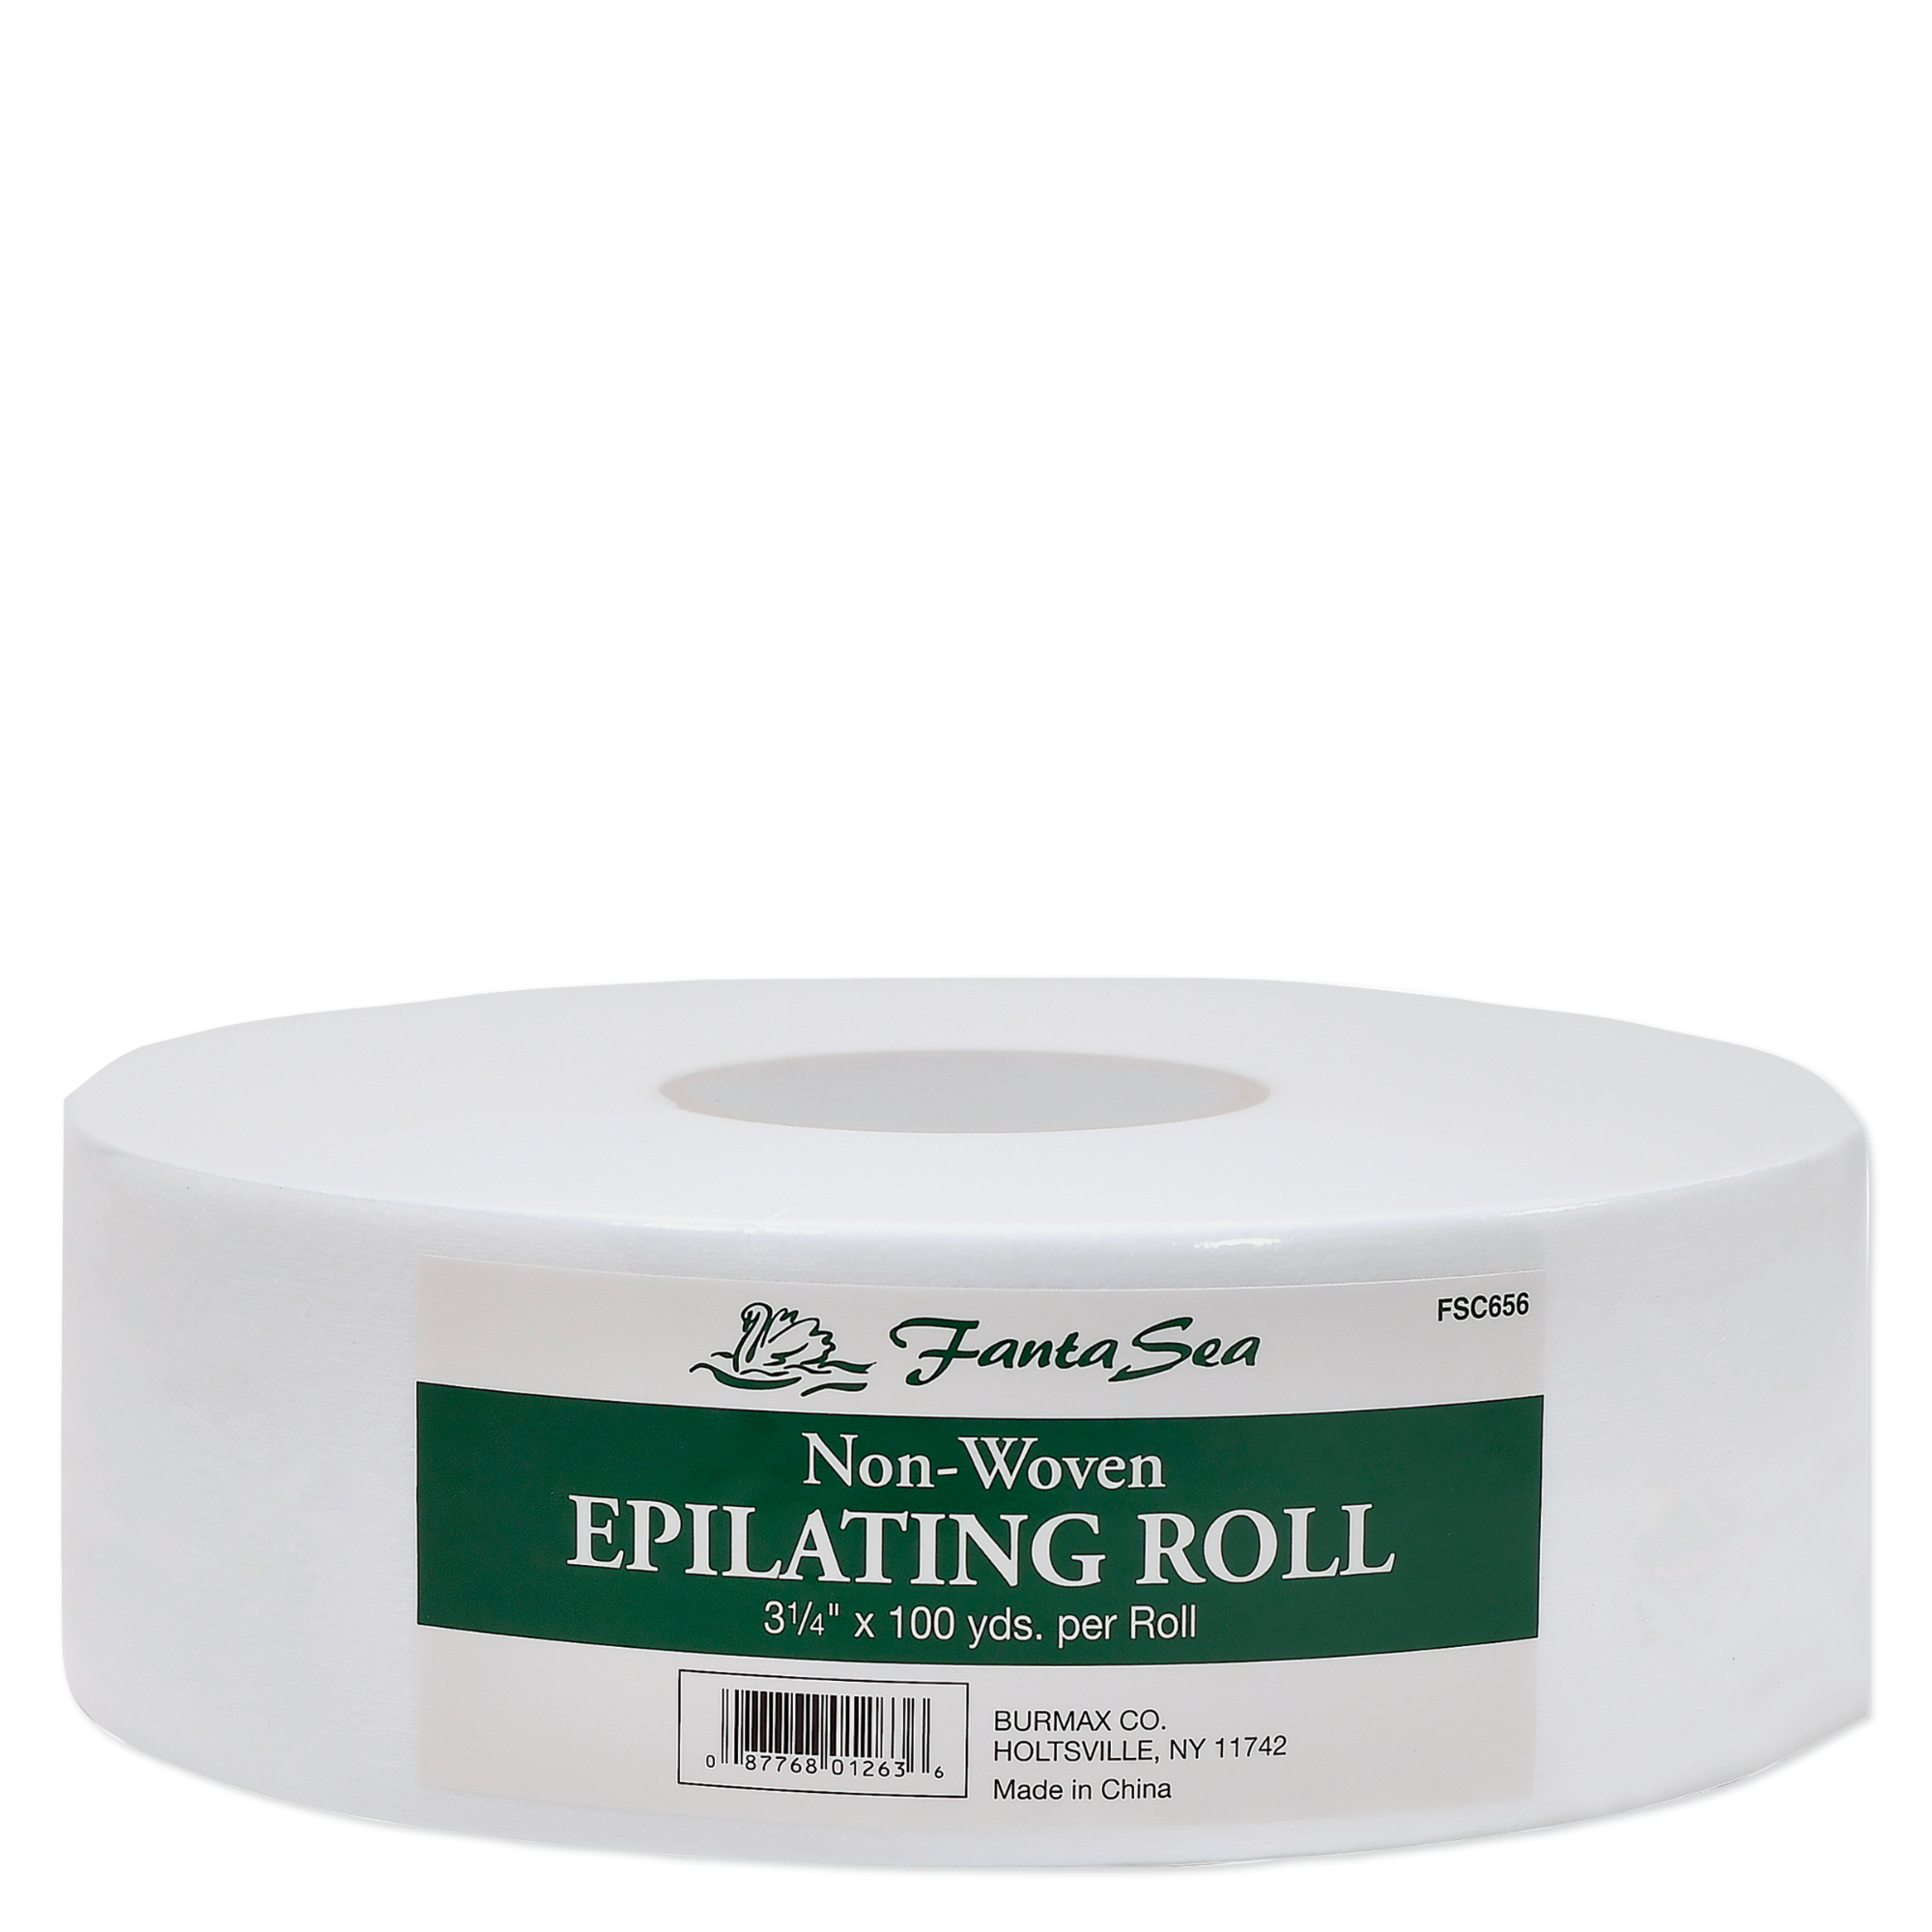 Non-Woven Epilating Roll - 100 yards